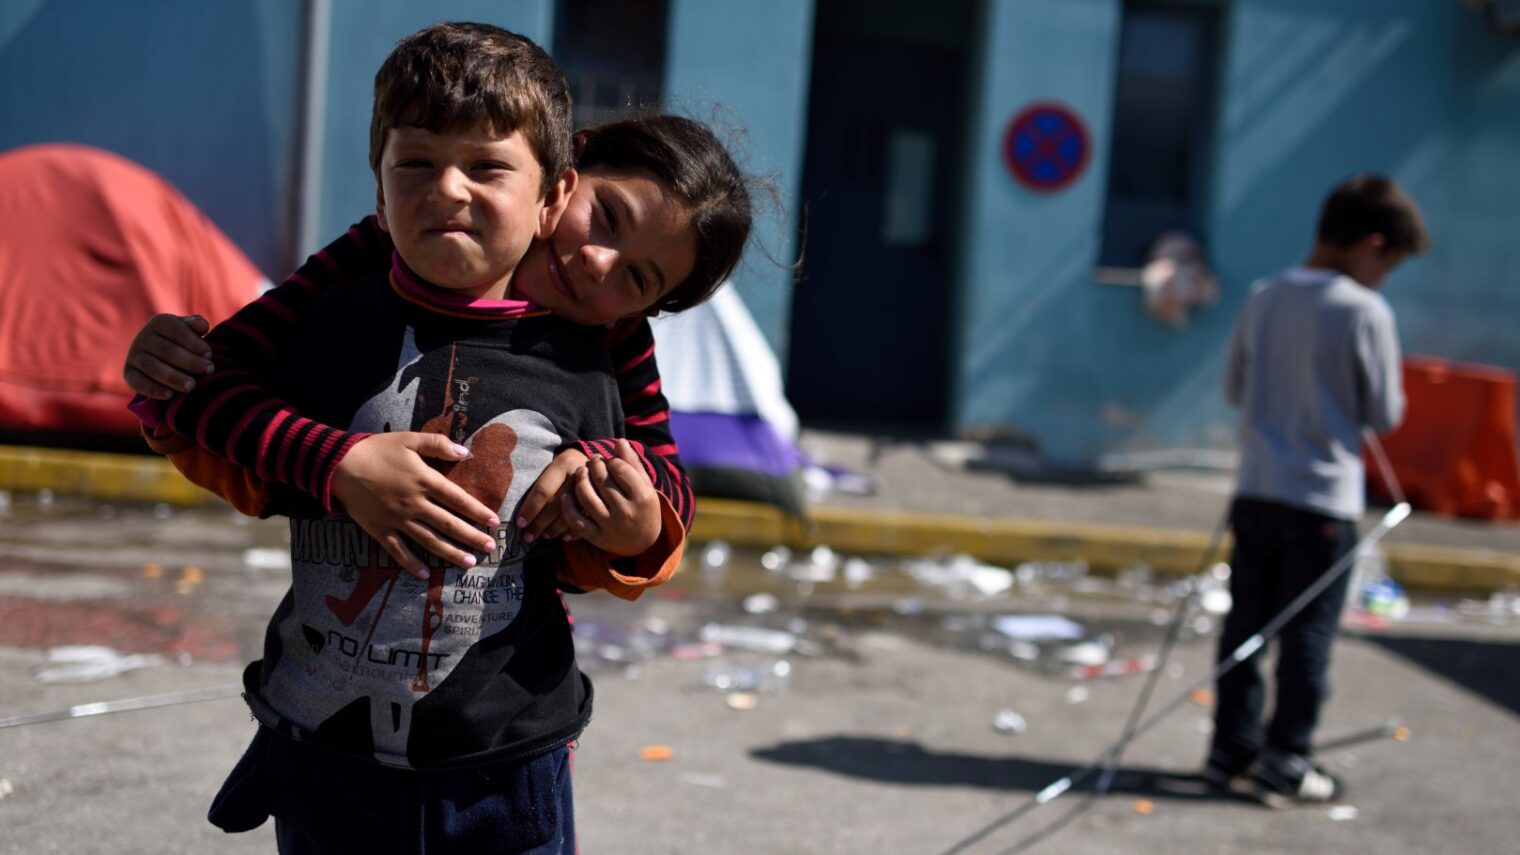 Syrian refugee children at a temporary shelter in Athens. Photo by Gili Yaari/FLASH90